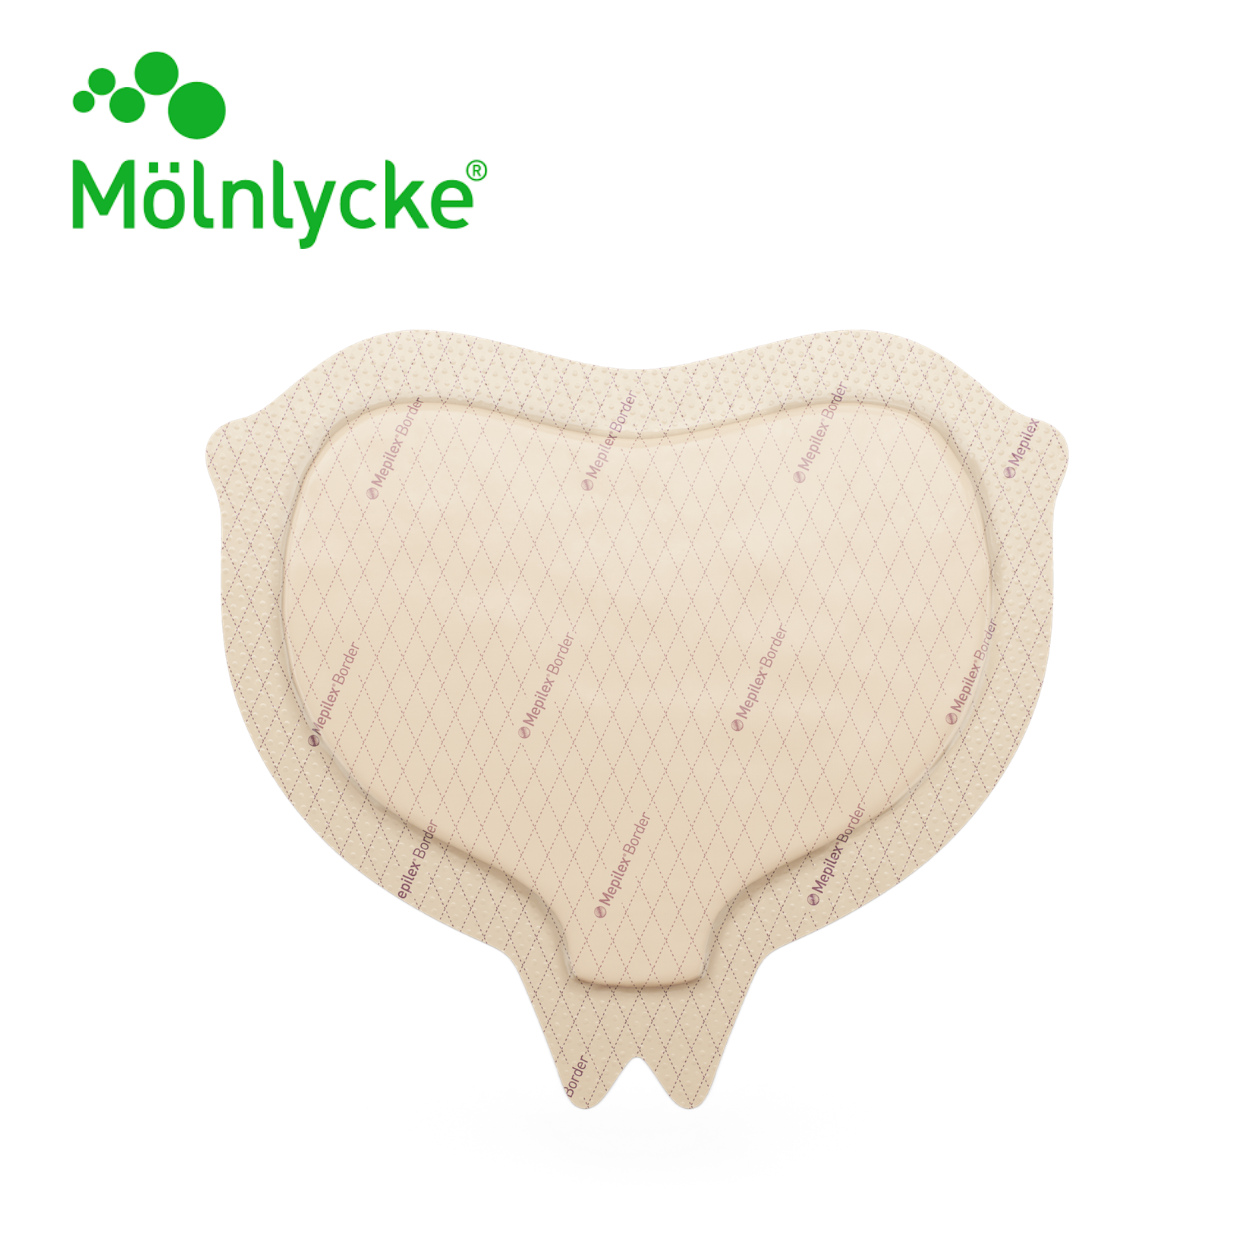 Molnlycke Products (12)